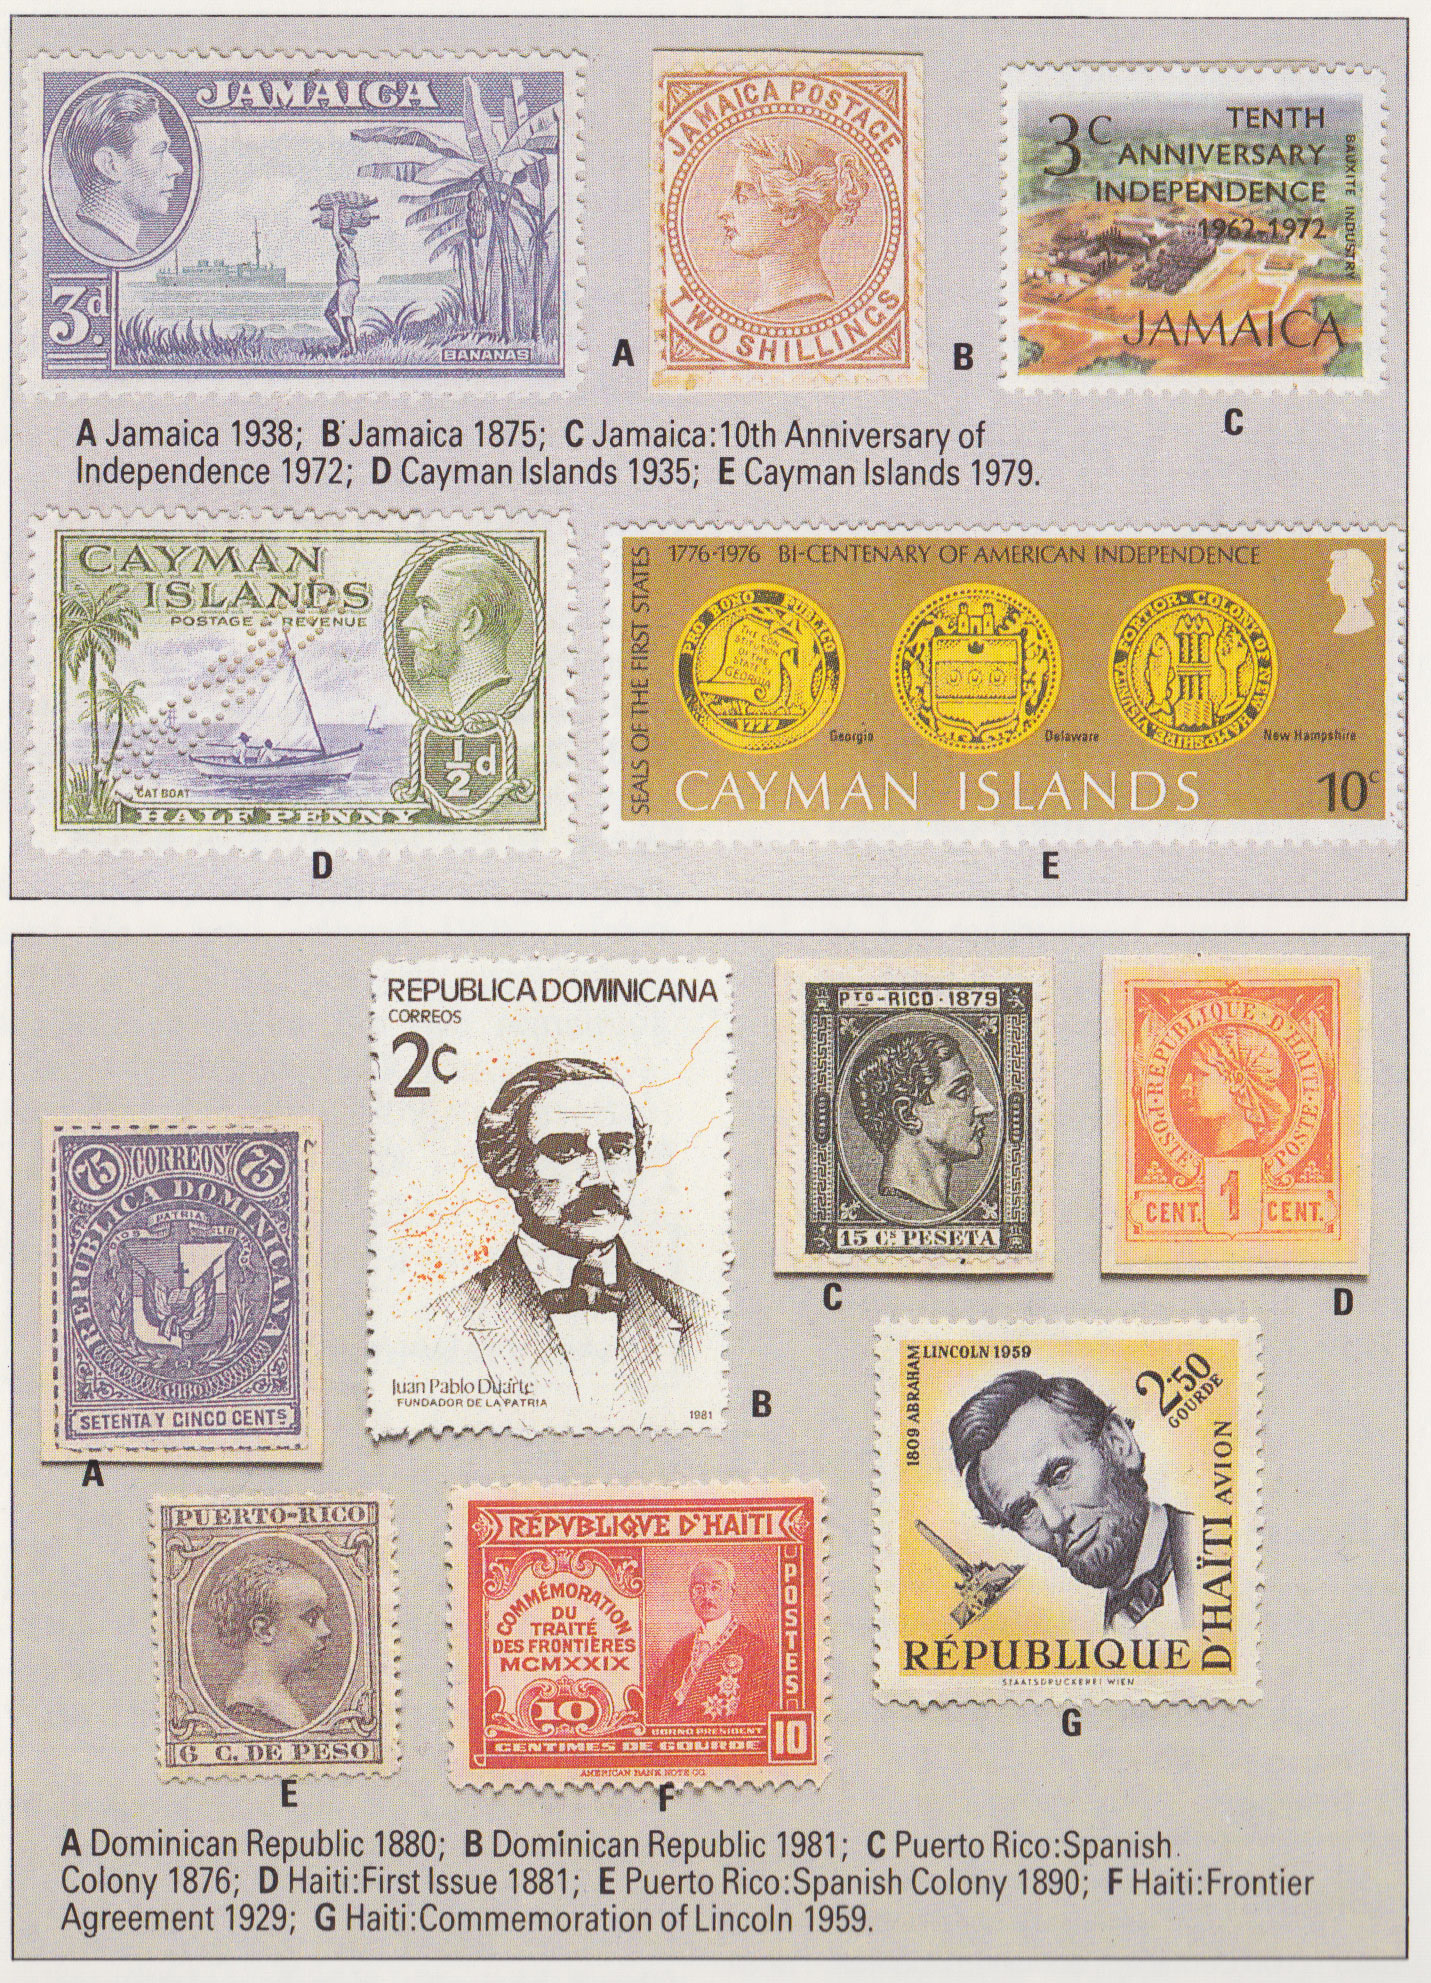 Cayman Islands Dominican Republic stamps